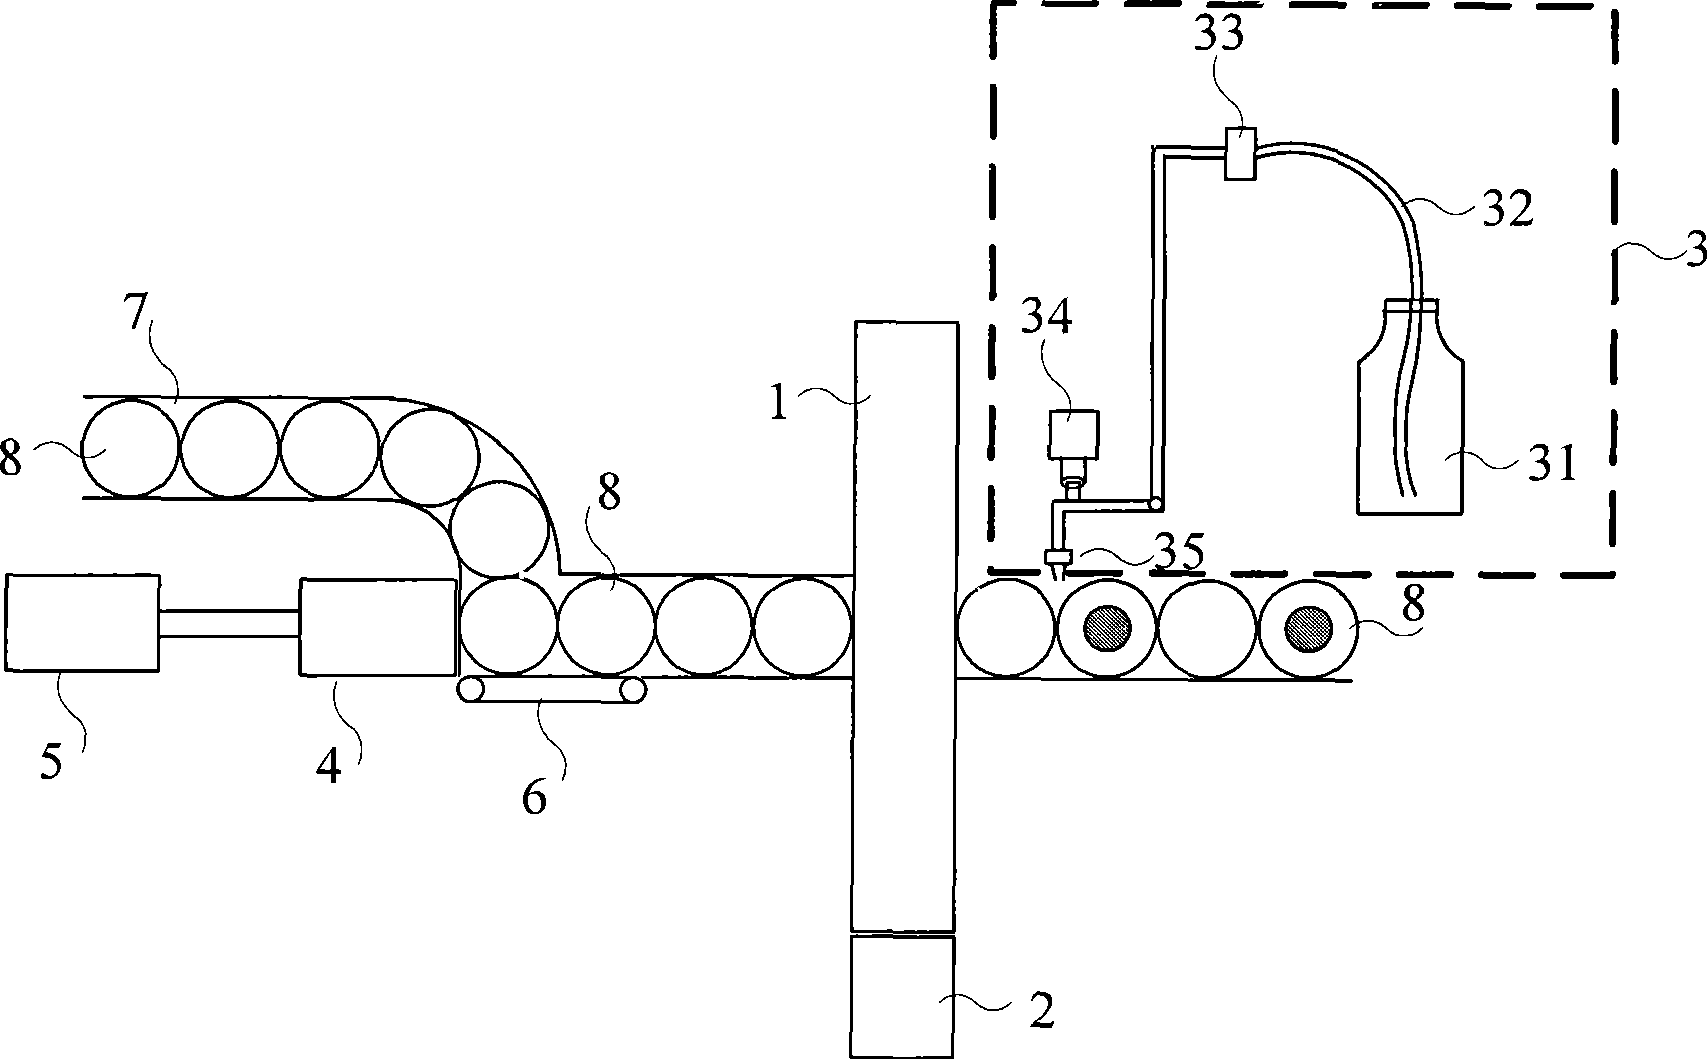 Device for self-arranging and bonding battery